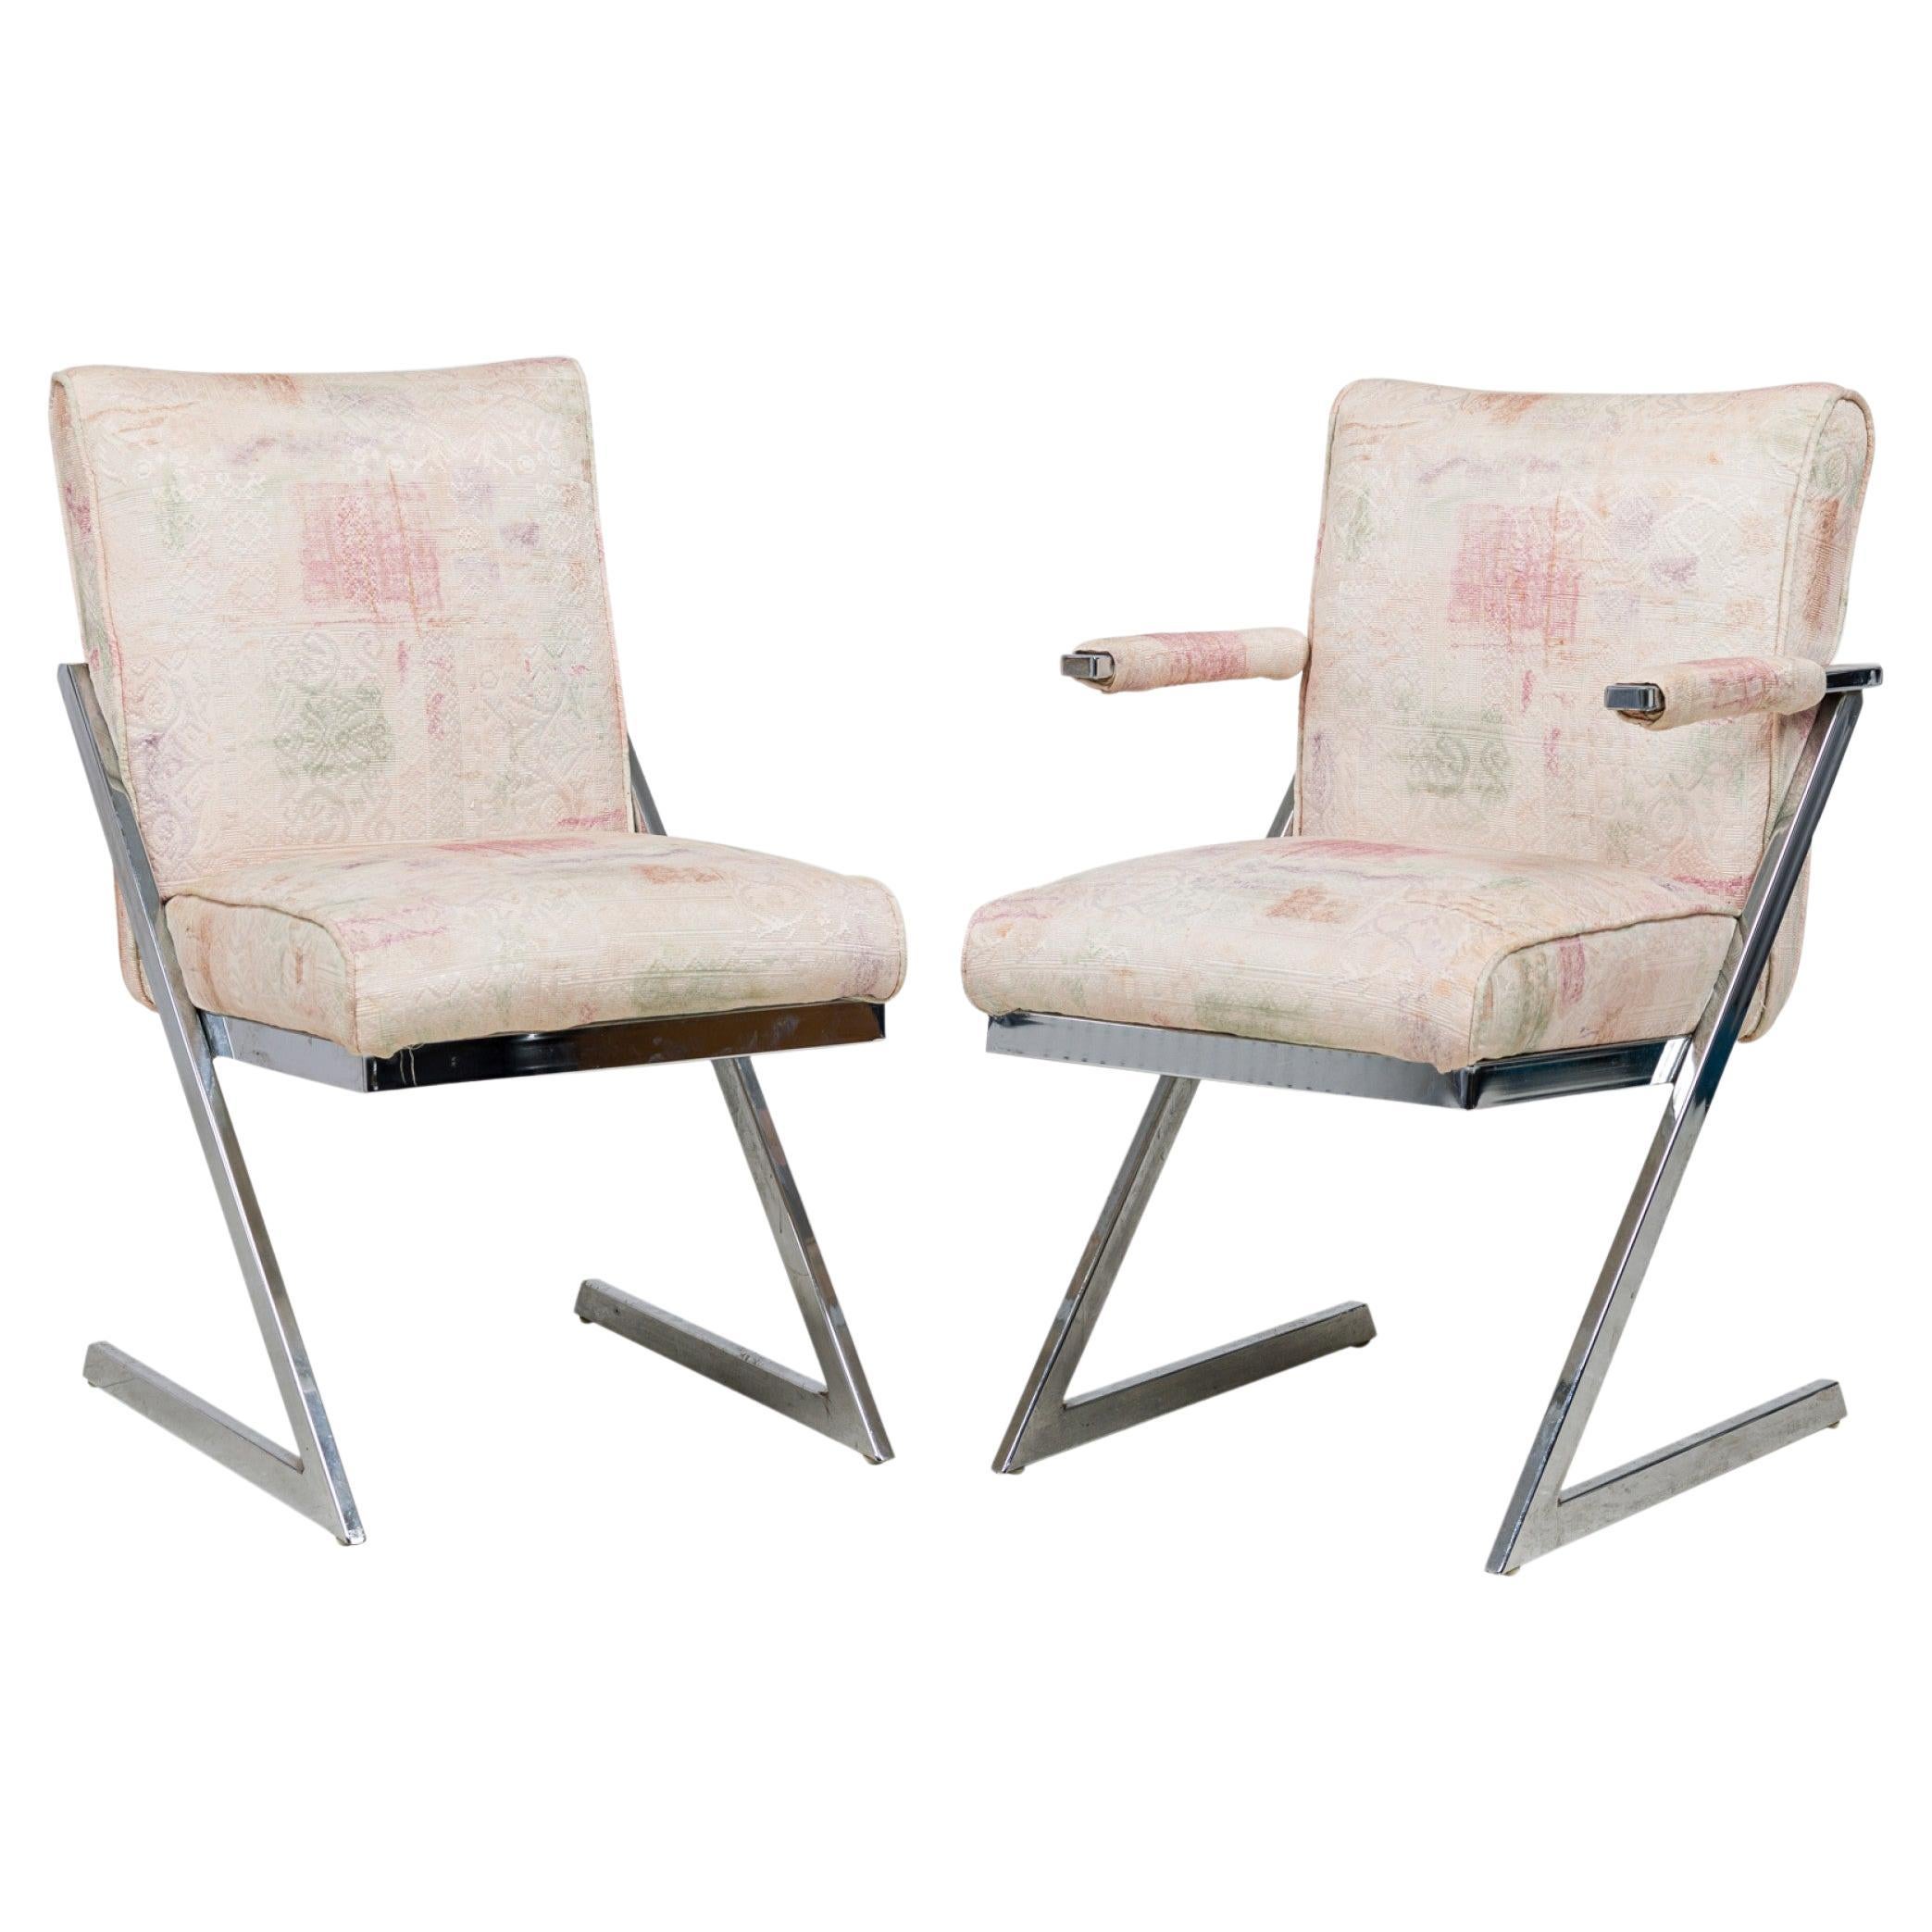 Set of 6 Dia Midcentury American Chrome Z Chairs in Beige and Pastel Upholstery